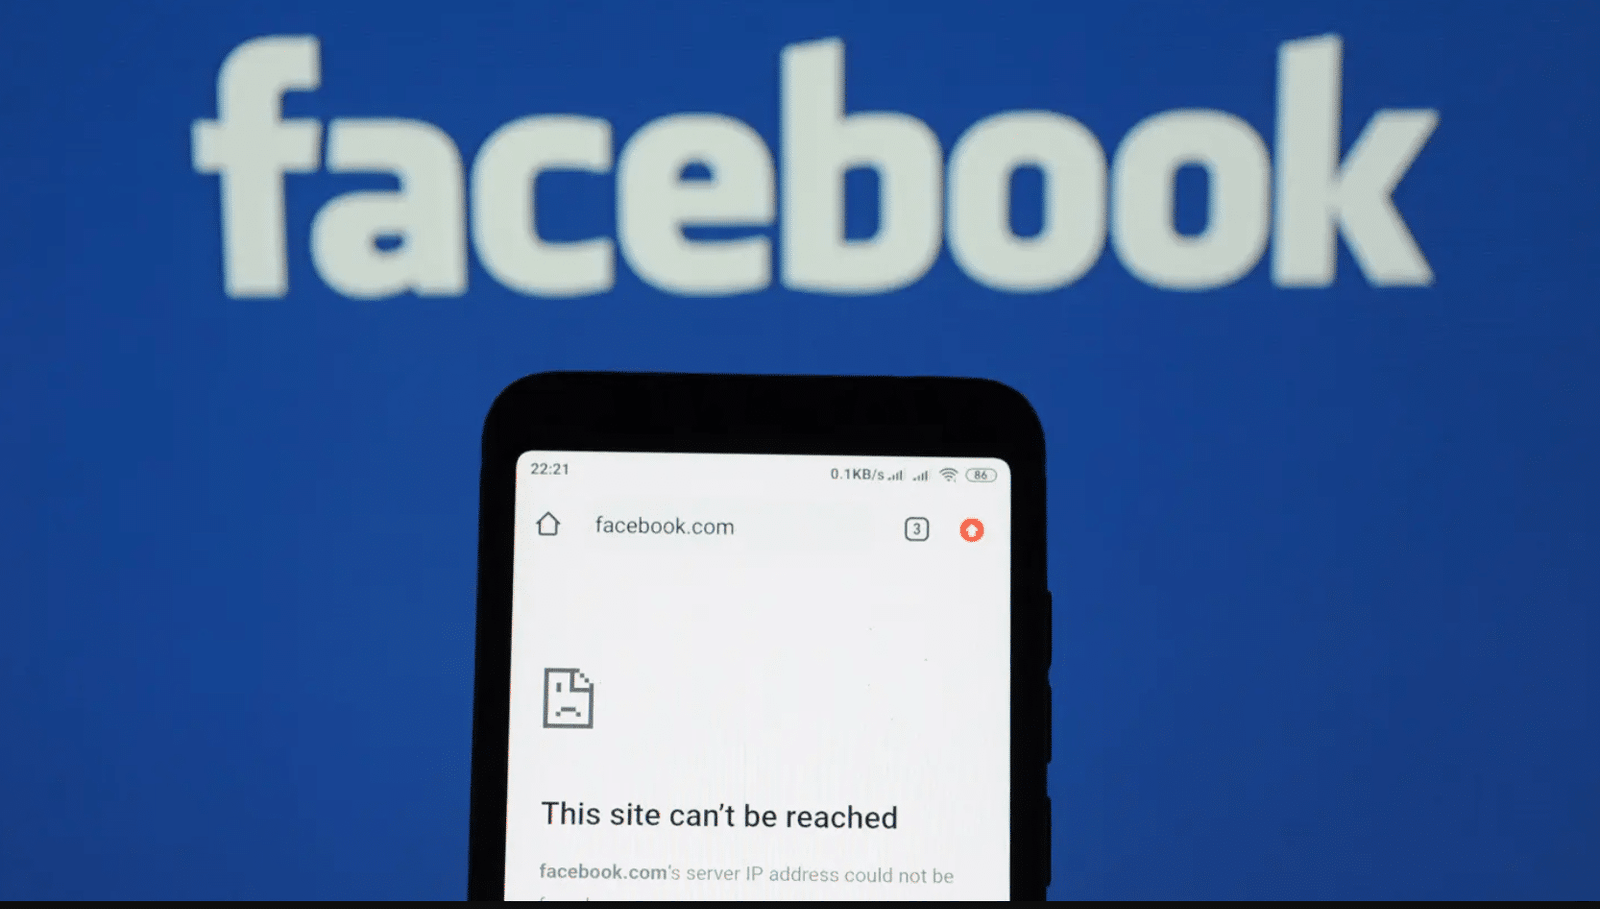 Facebook, Instagram and Messenger are back up and running after a social media blackout.